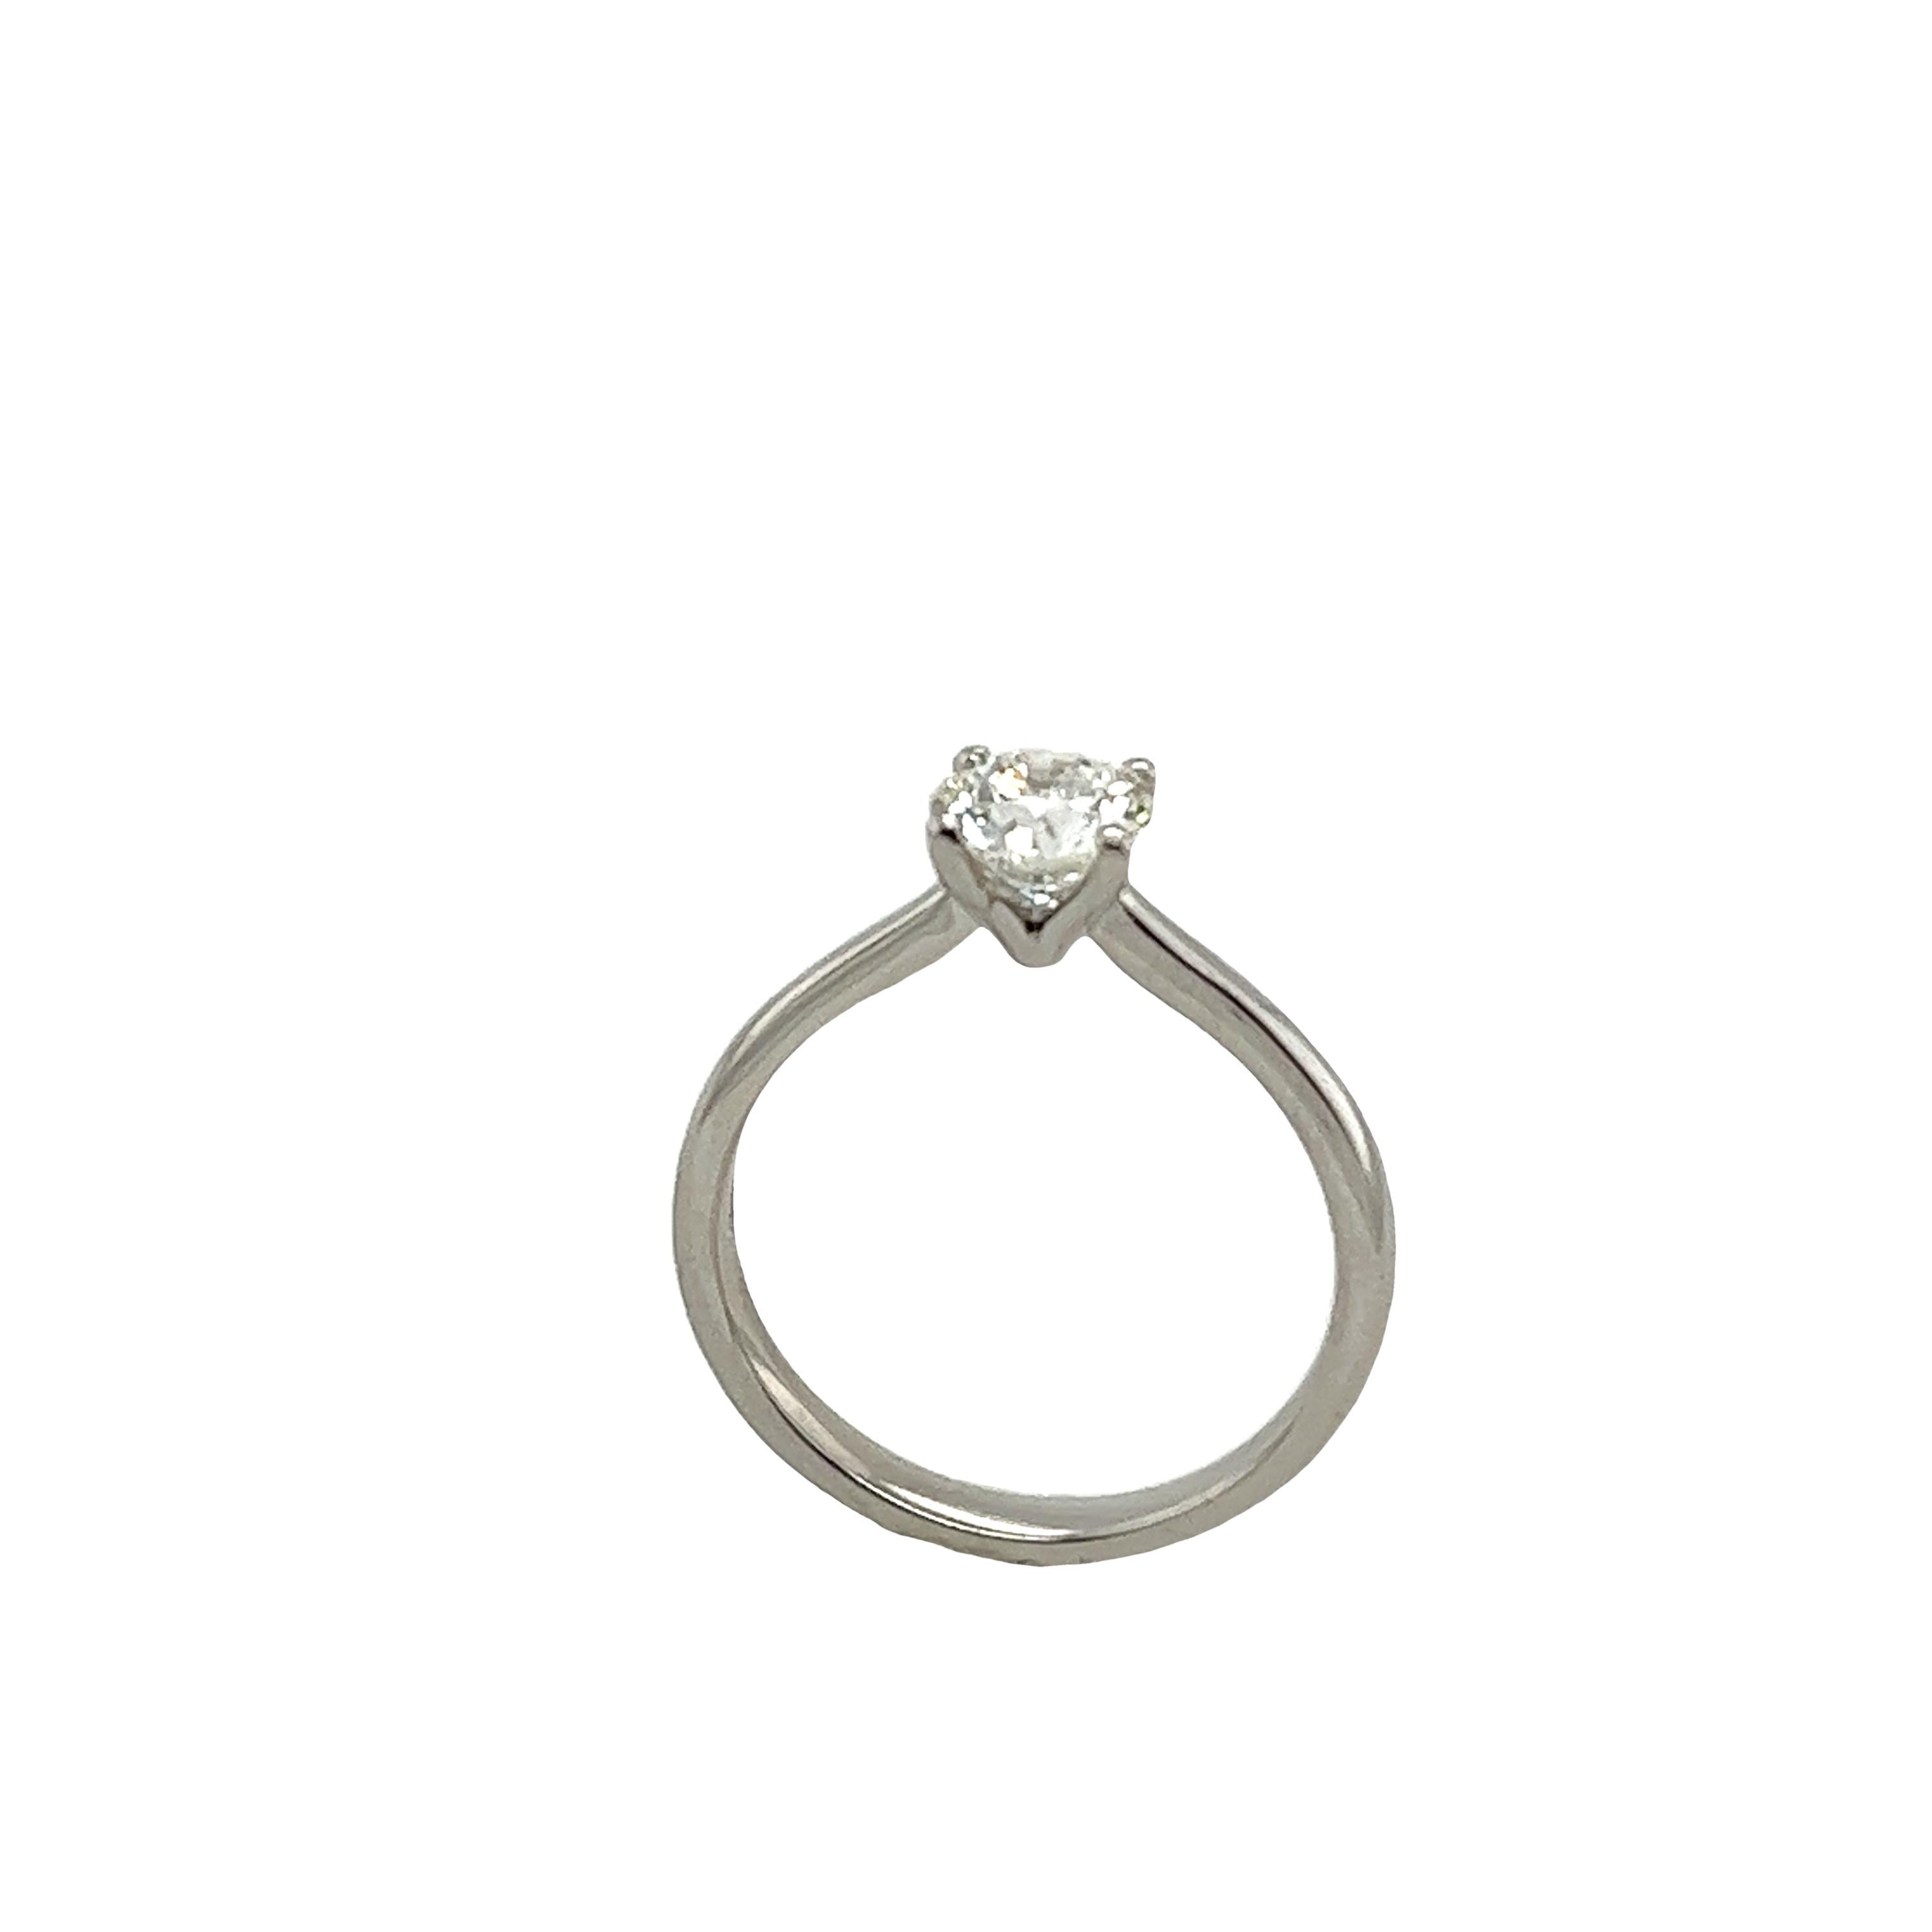 Diamond Solitaire Ring Set With 0.80ct Round Brilliant Cut Diamond For Sale 4